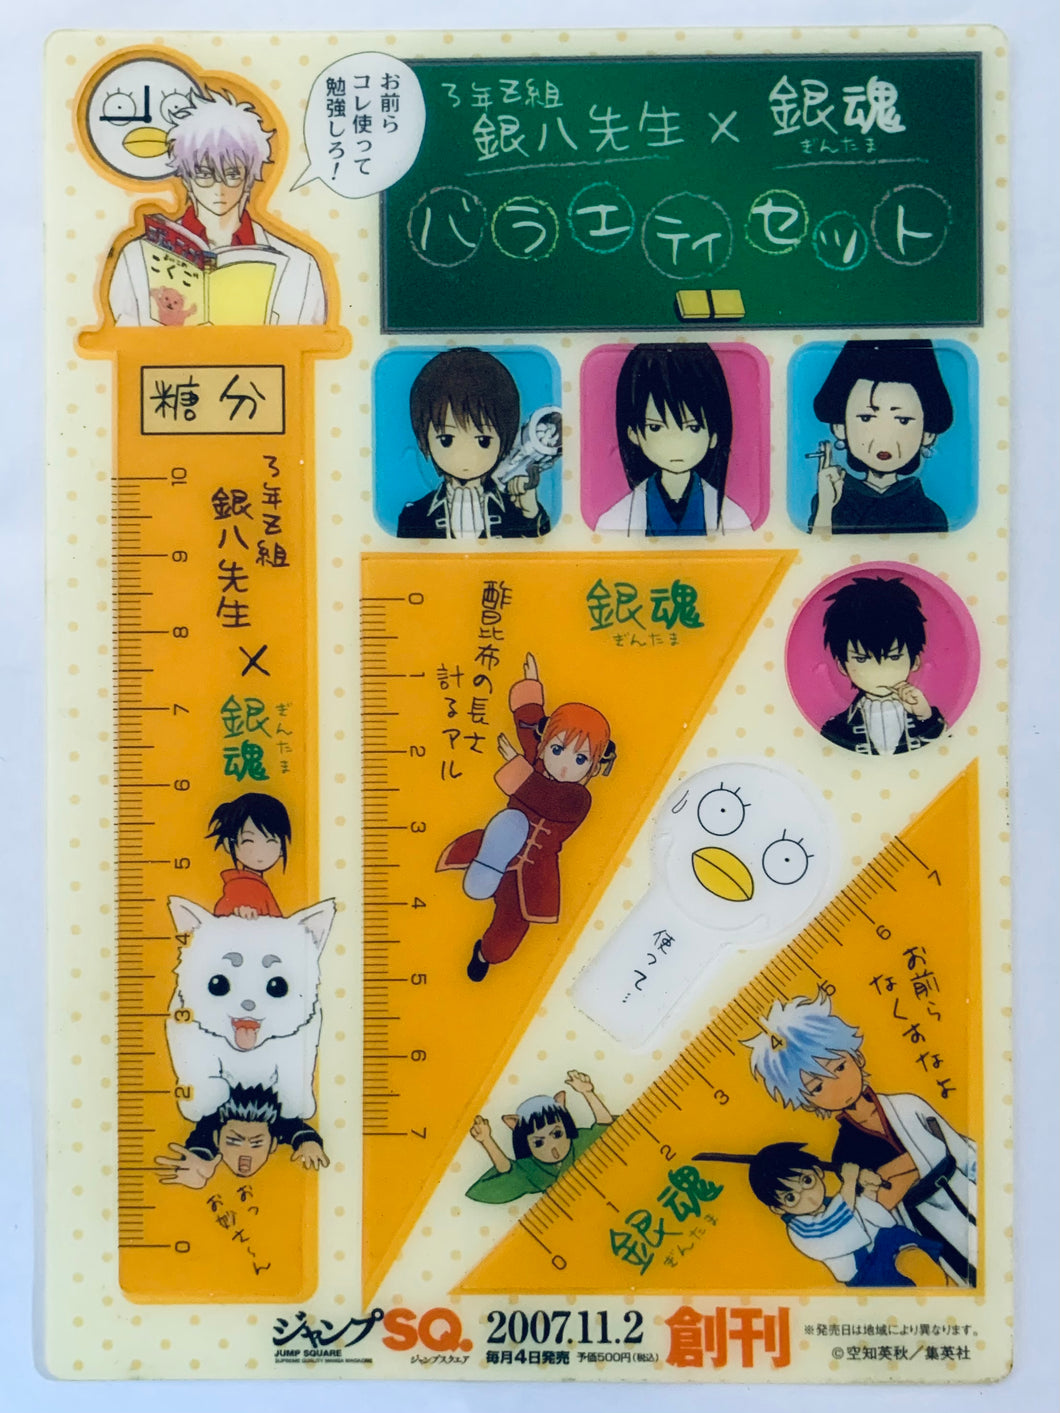 Gintama x 3rd Year Z Class Ginpachi Sensei - Special Variety Sheet - Seicomart Limited Jump Square Launch Commemoration Campaign - Jump SQ December 2007